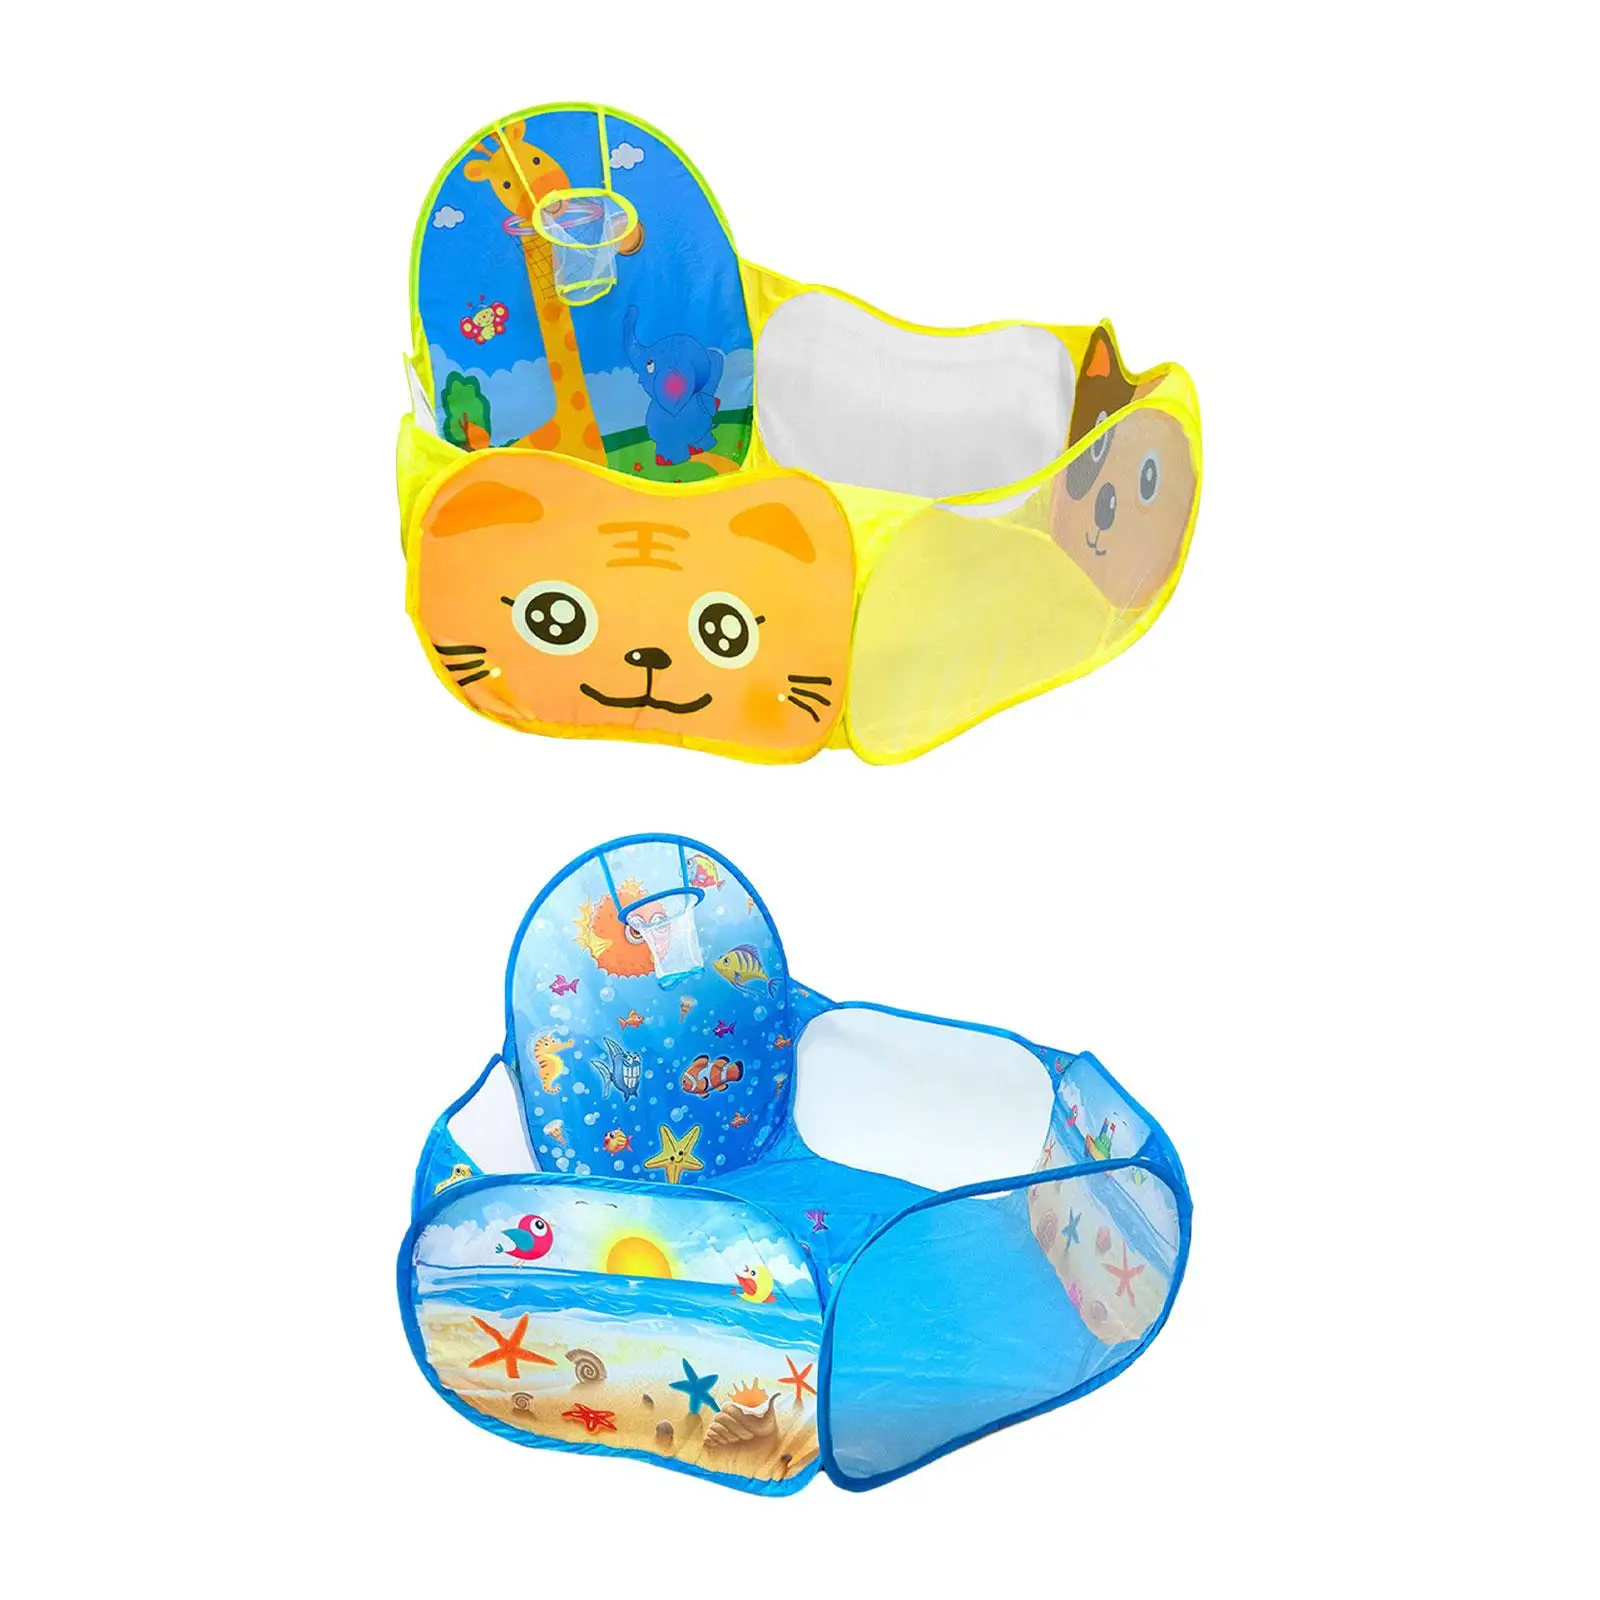 Kids Play Tent Child Room Decor 4 ft/120cm for Toddlers Children Kids